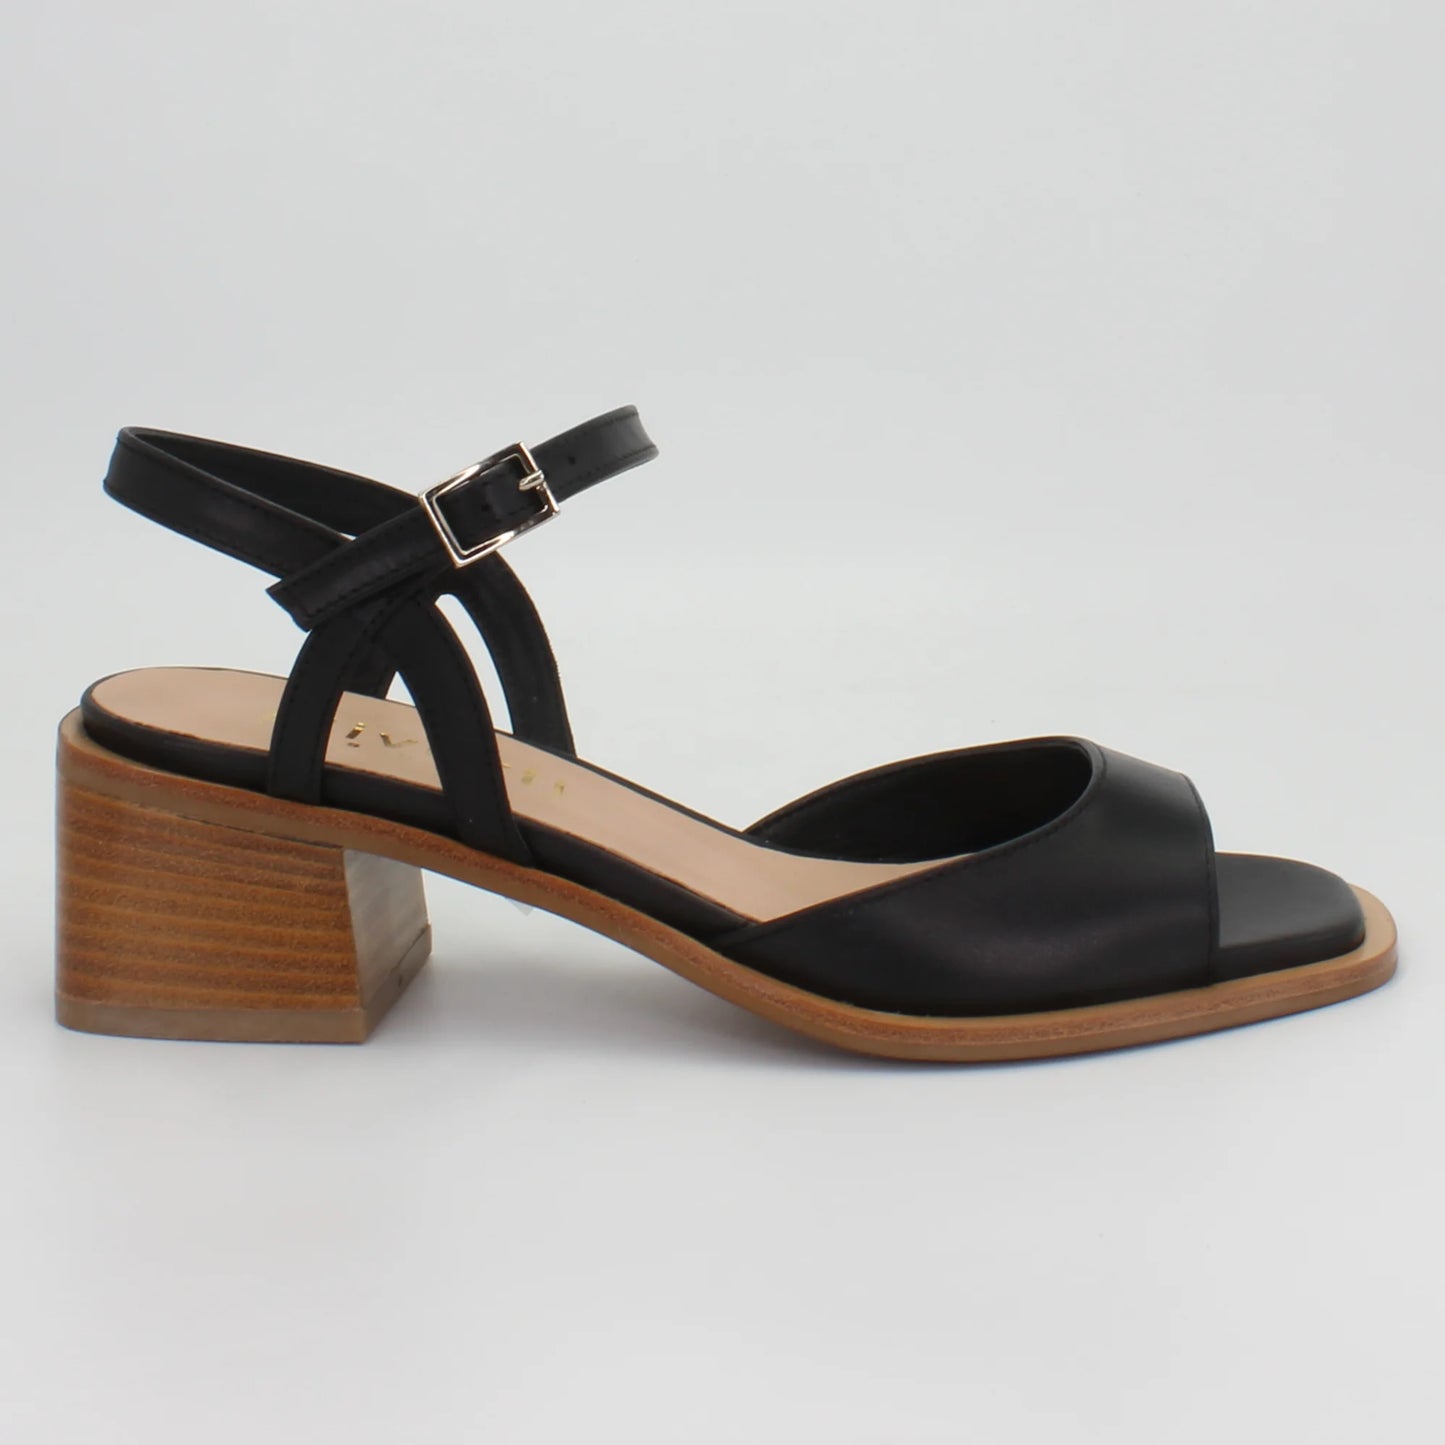 Shop Handmade Italian Leather block heel in nero nappa (WILMA2) or browse our range of hand-made Italian shoes in leather or suede in-store at Aliverti Cape Town, or shop online. We deliver in South Africa & offer multiple payment plans as well as accept multiple safe & secure payment methods.